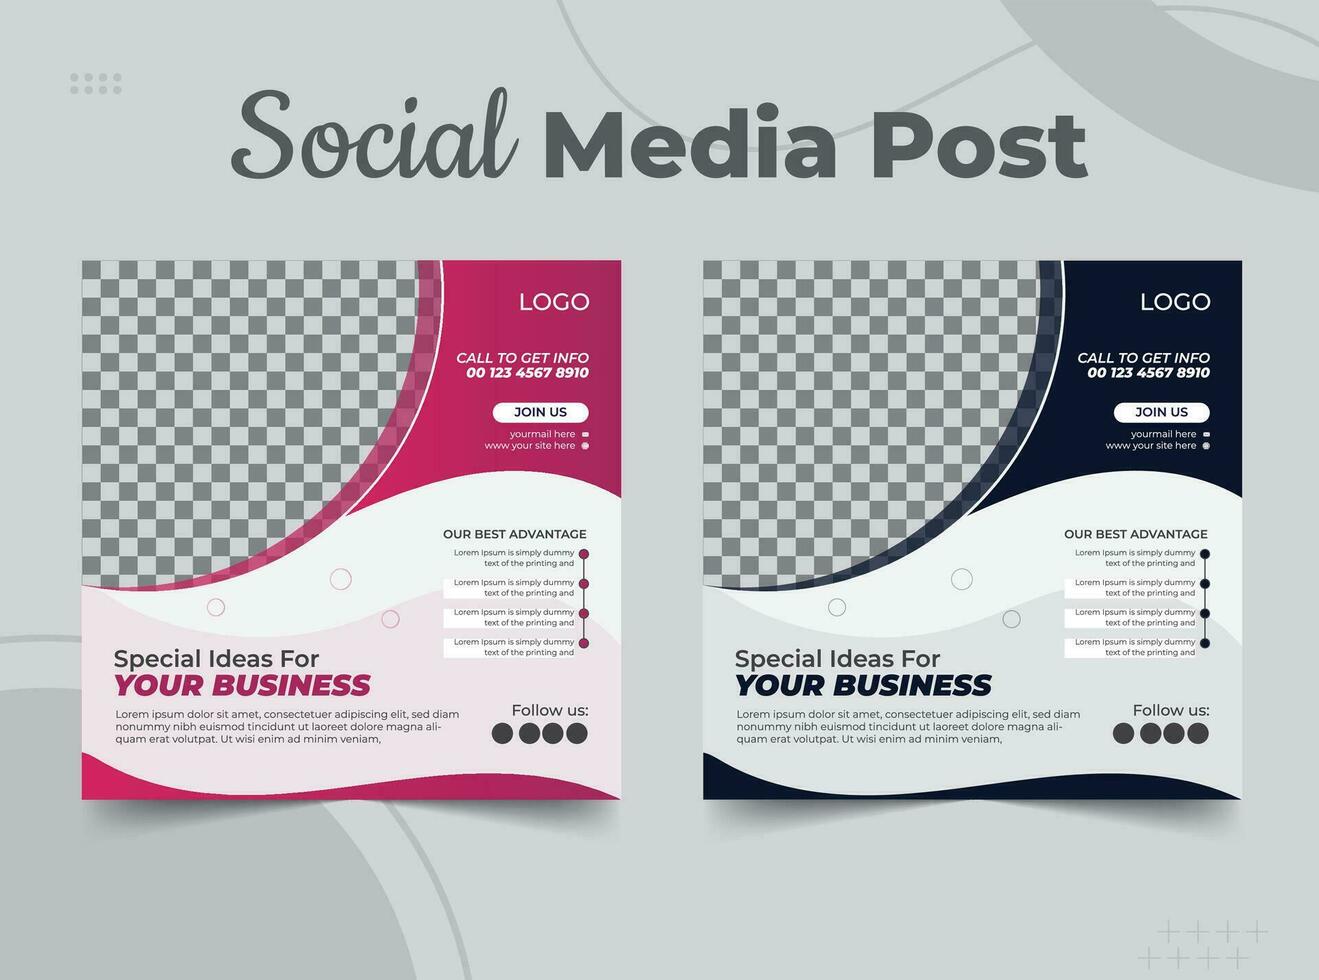 Corporate Social Media Post Design Template for your Business vector